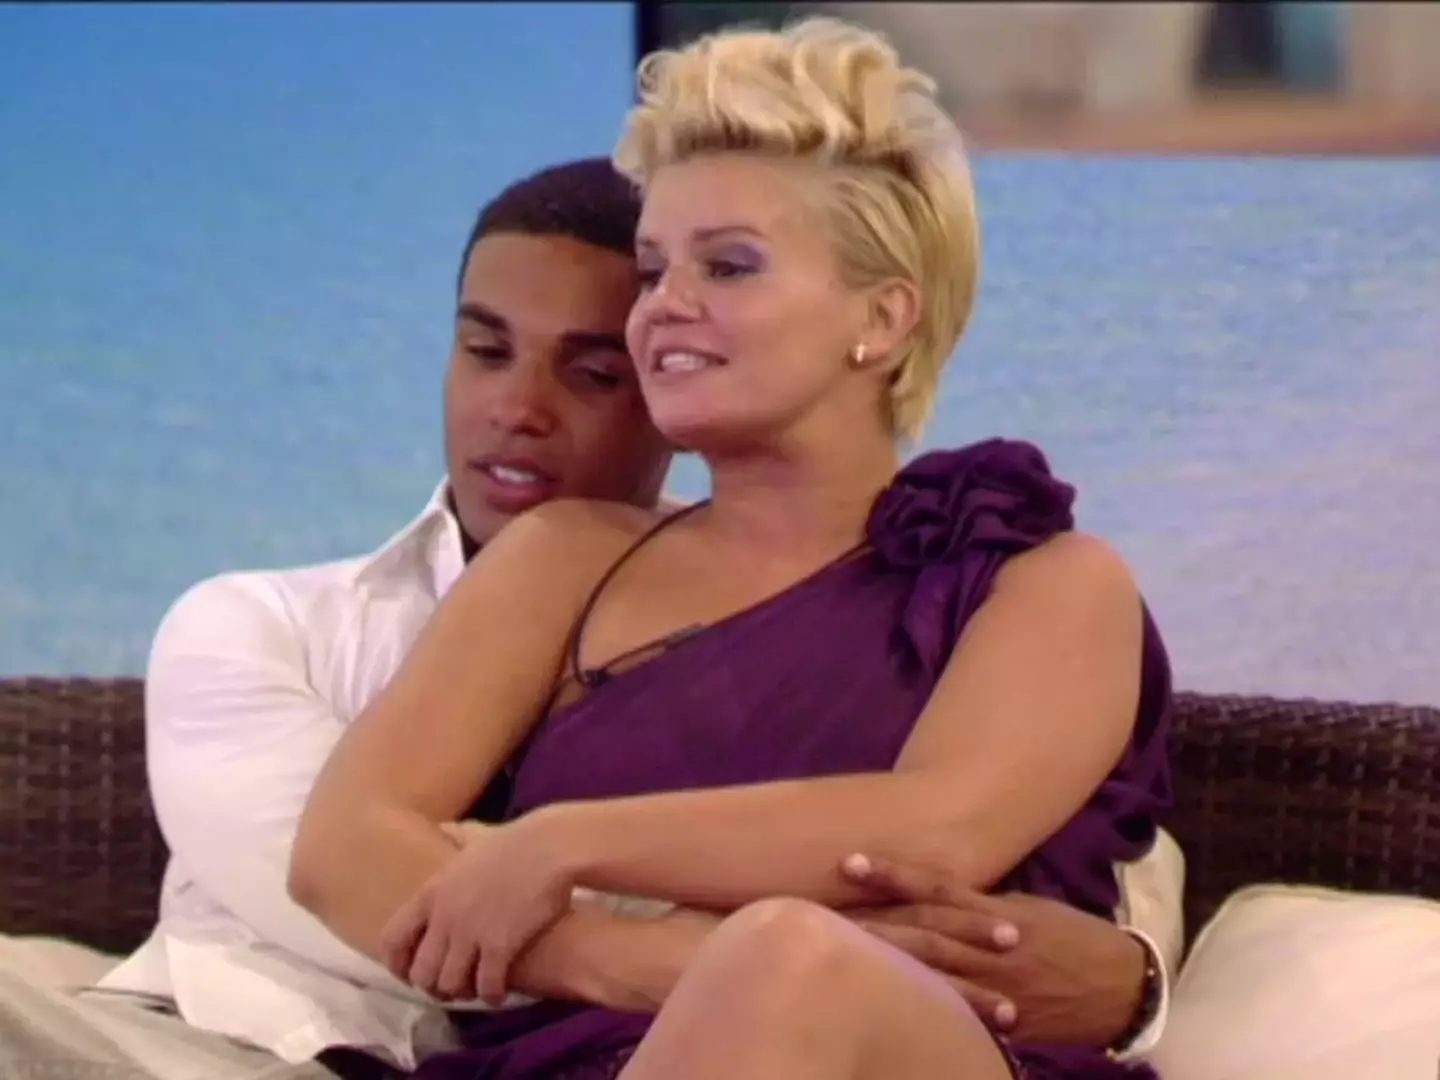 The actor struck up a romance with Kerry Katona back in 2011.